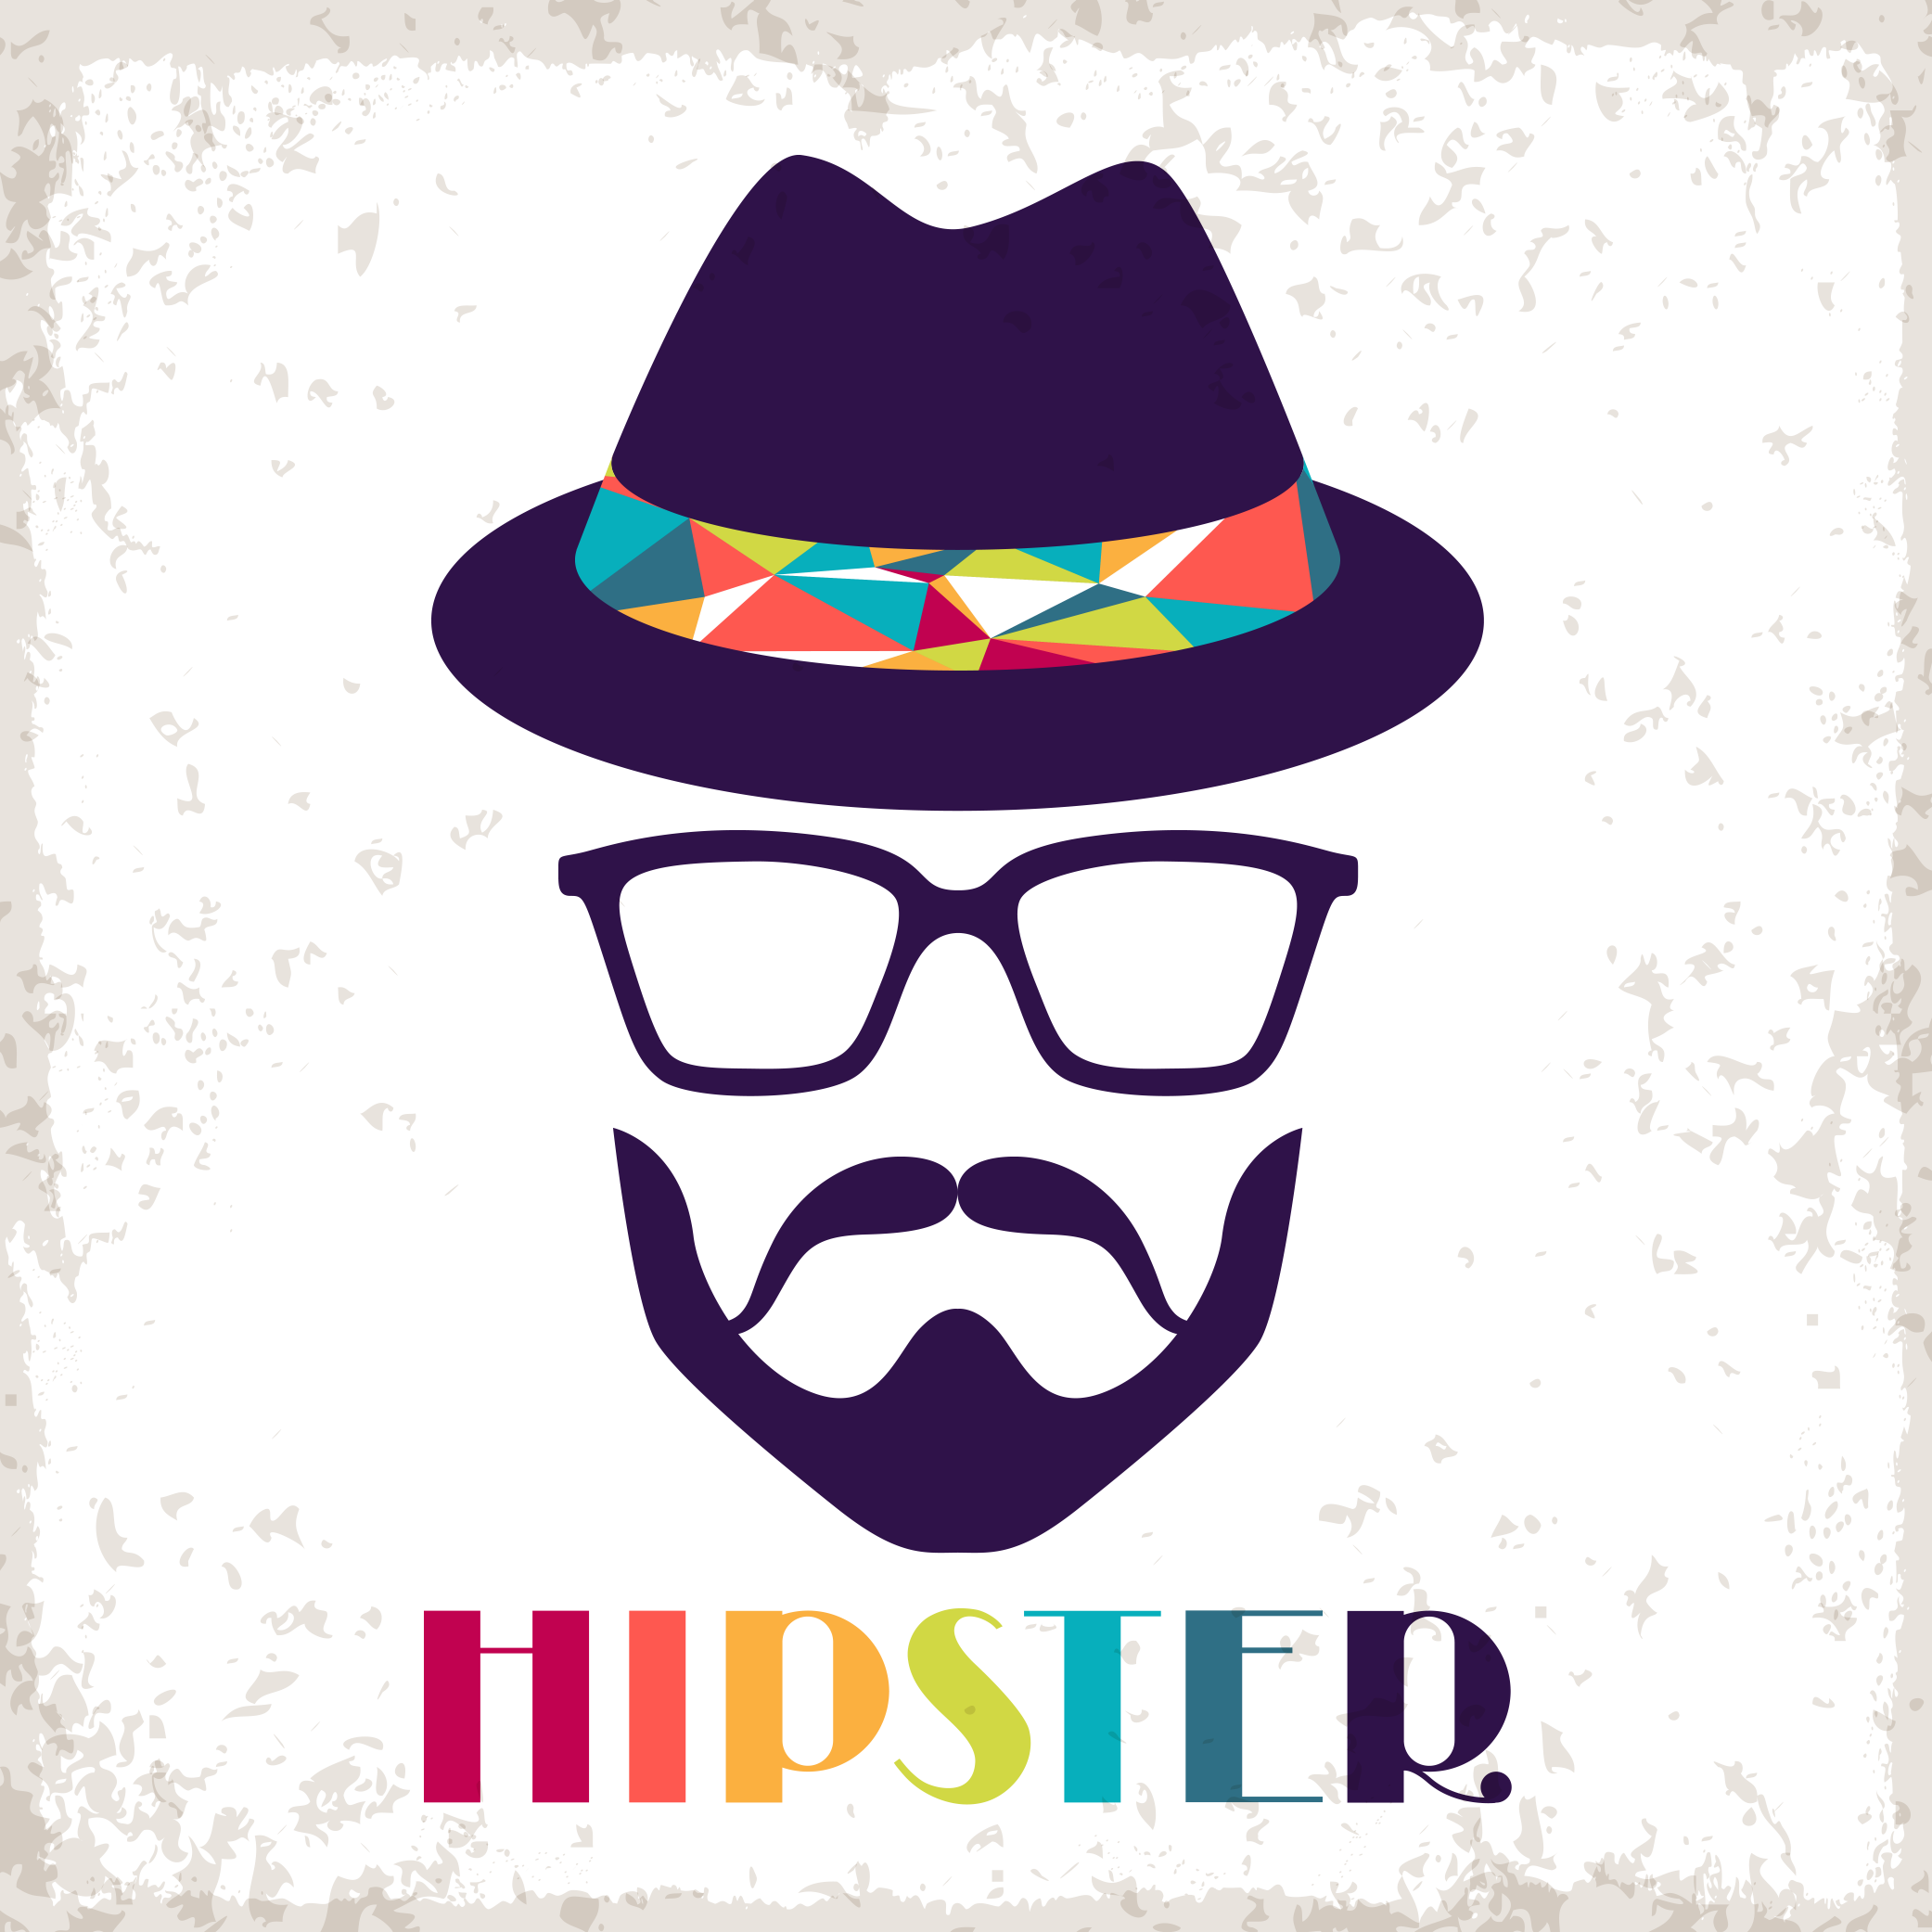 Uncle Style Hipster Retro Avatar Free Transparent Image HD Clipart